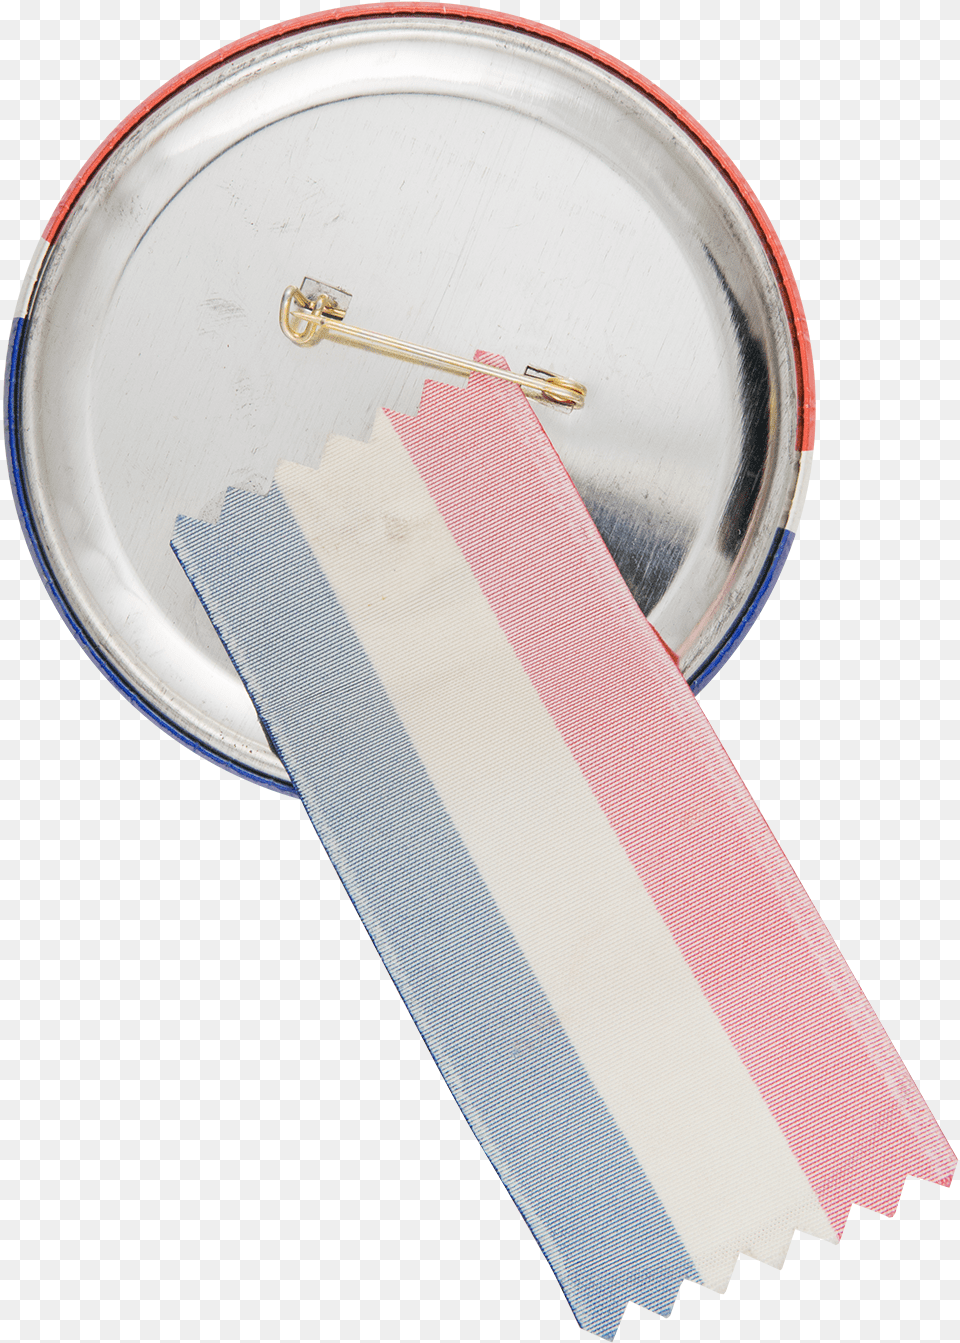 We Ll Make America Great Again Button Back Political Drinking Straw Png Image